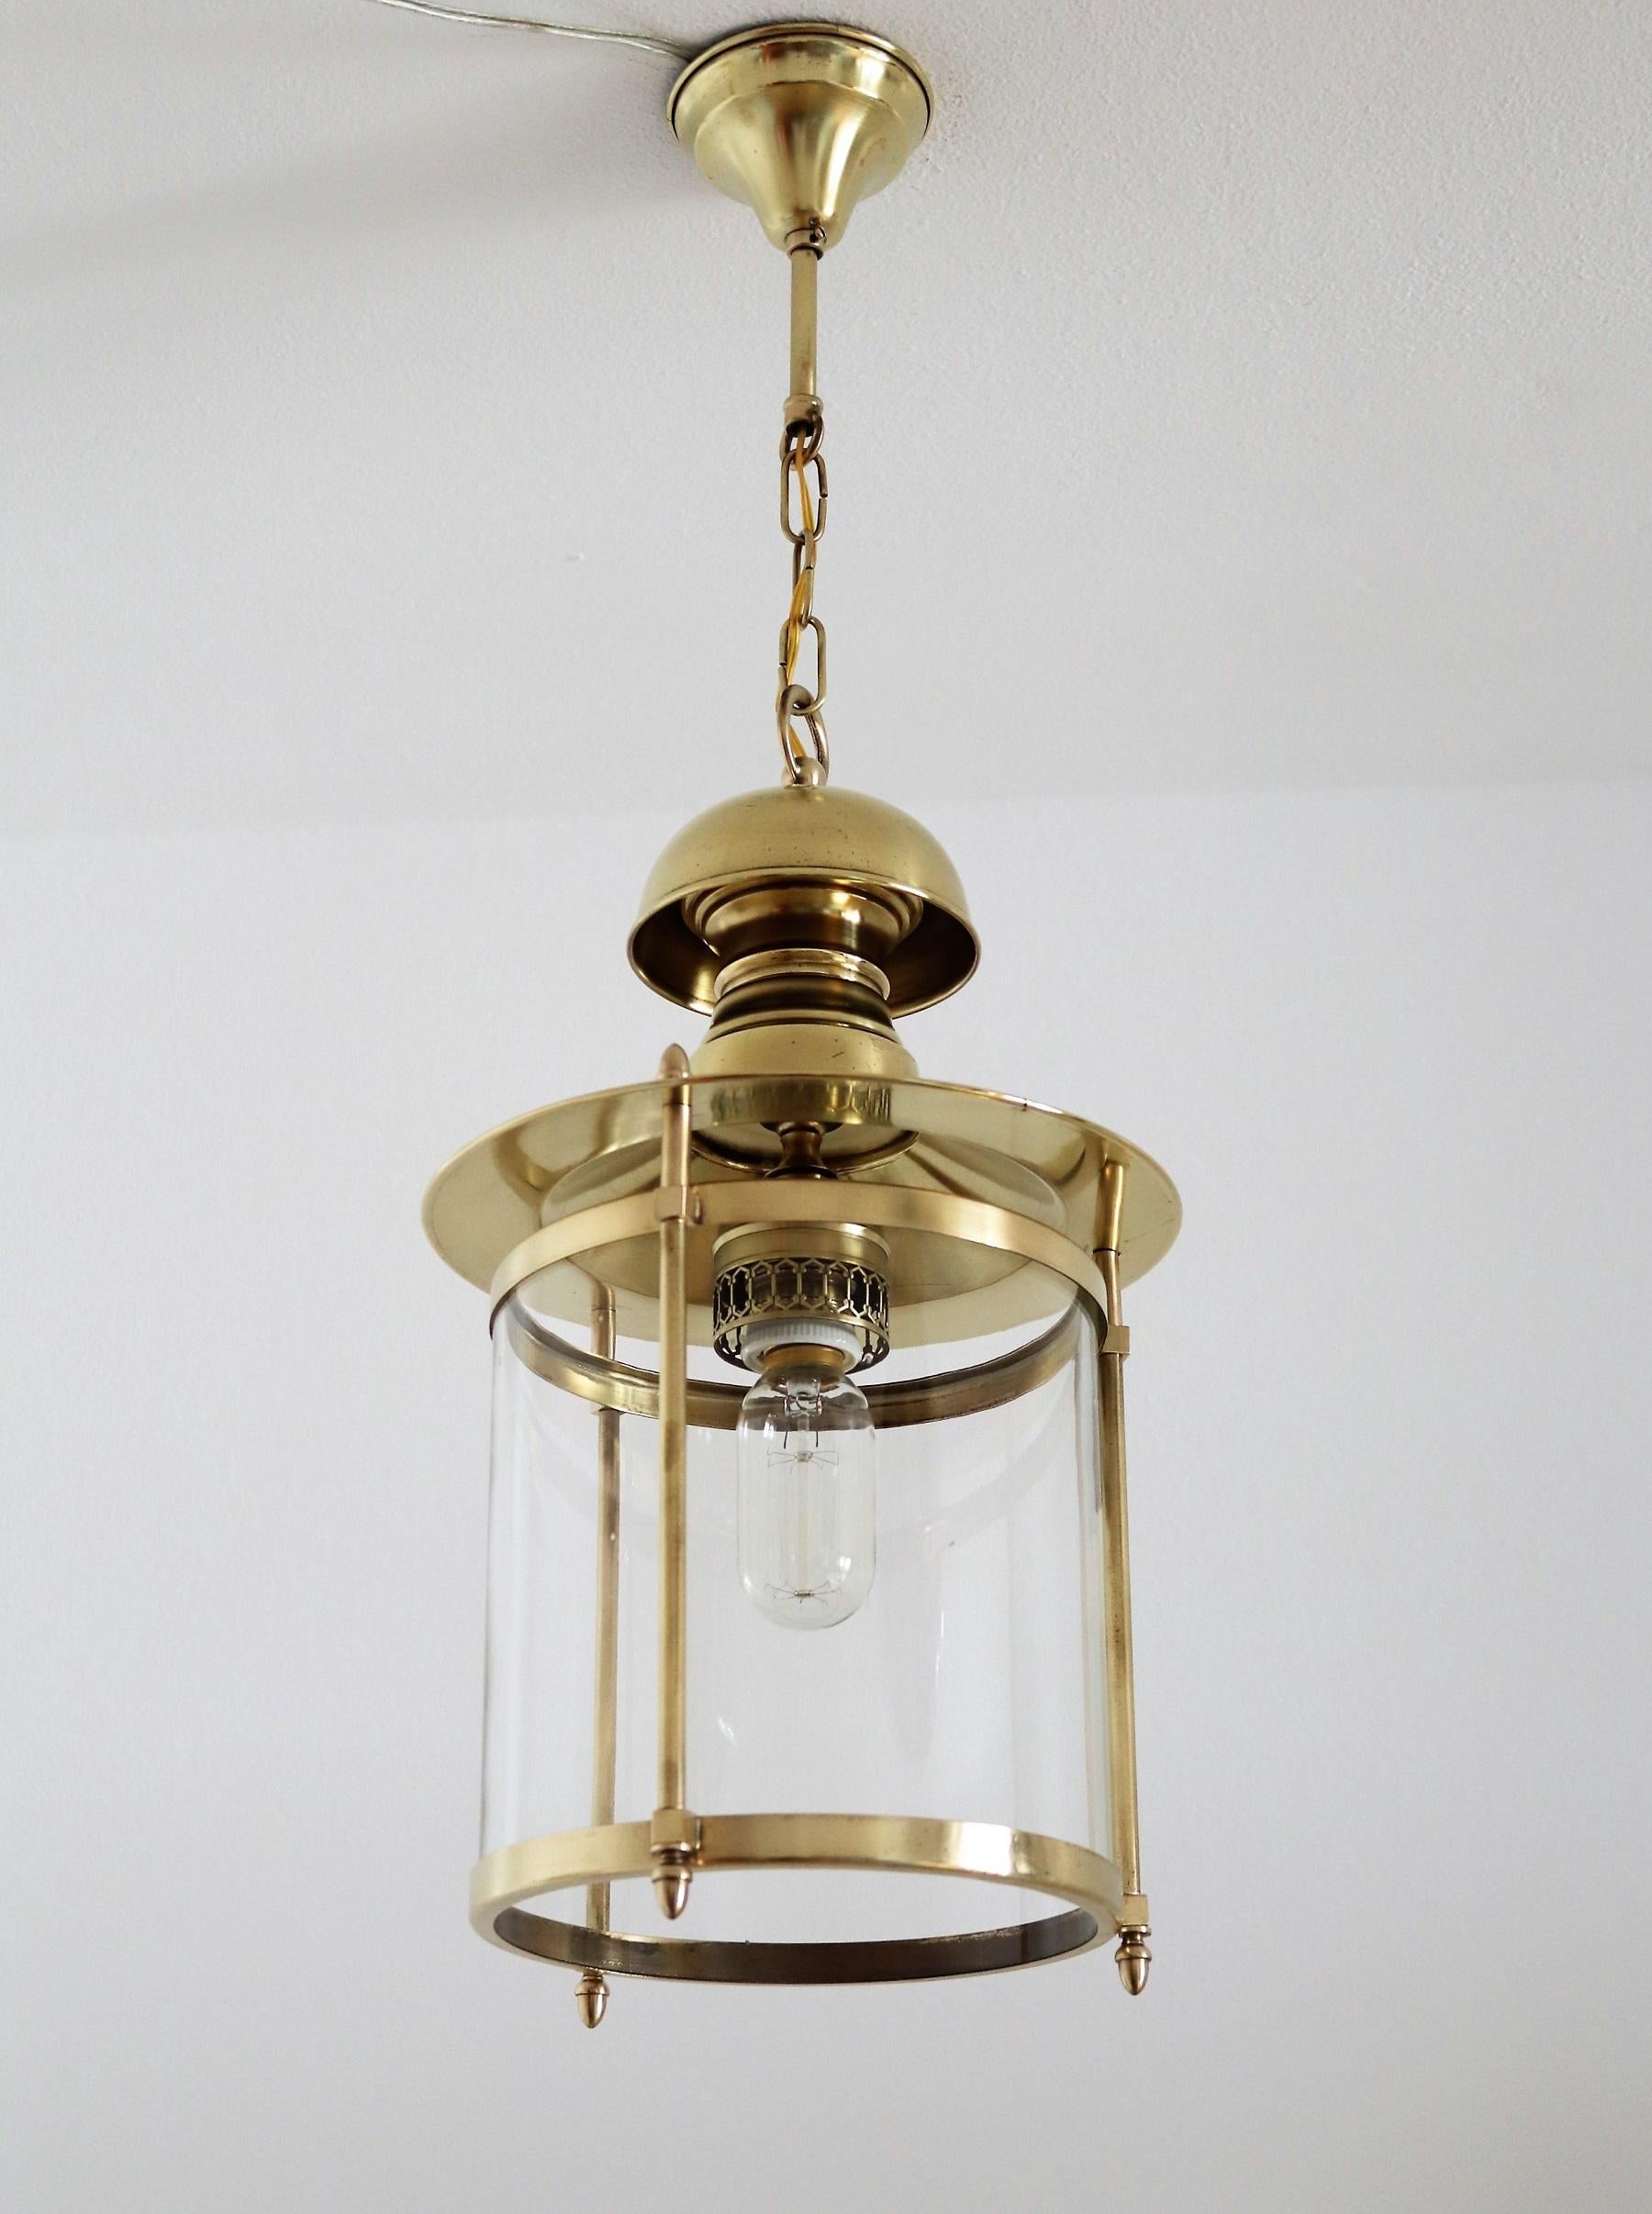 Gorgeous lantern or pendant lamp from the late Italian midcentury, made during the 1960s-1970s.
The pendant lamp is made of transparent glass, the golden details are made of brass, with original ceiling rose and chain.
Very good vintage and